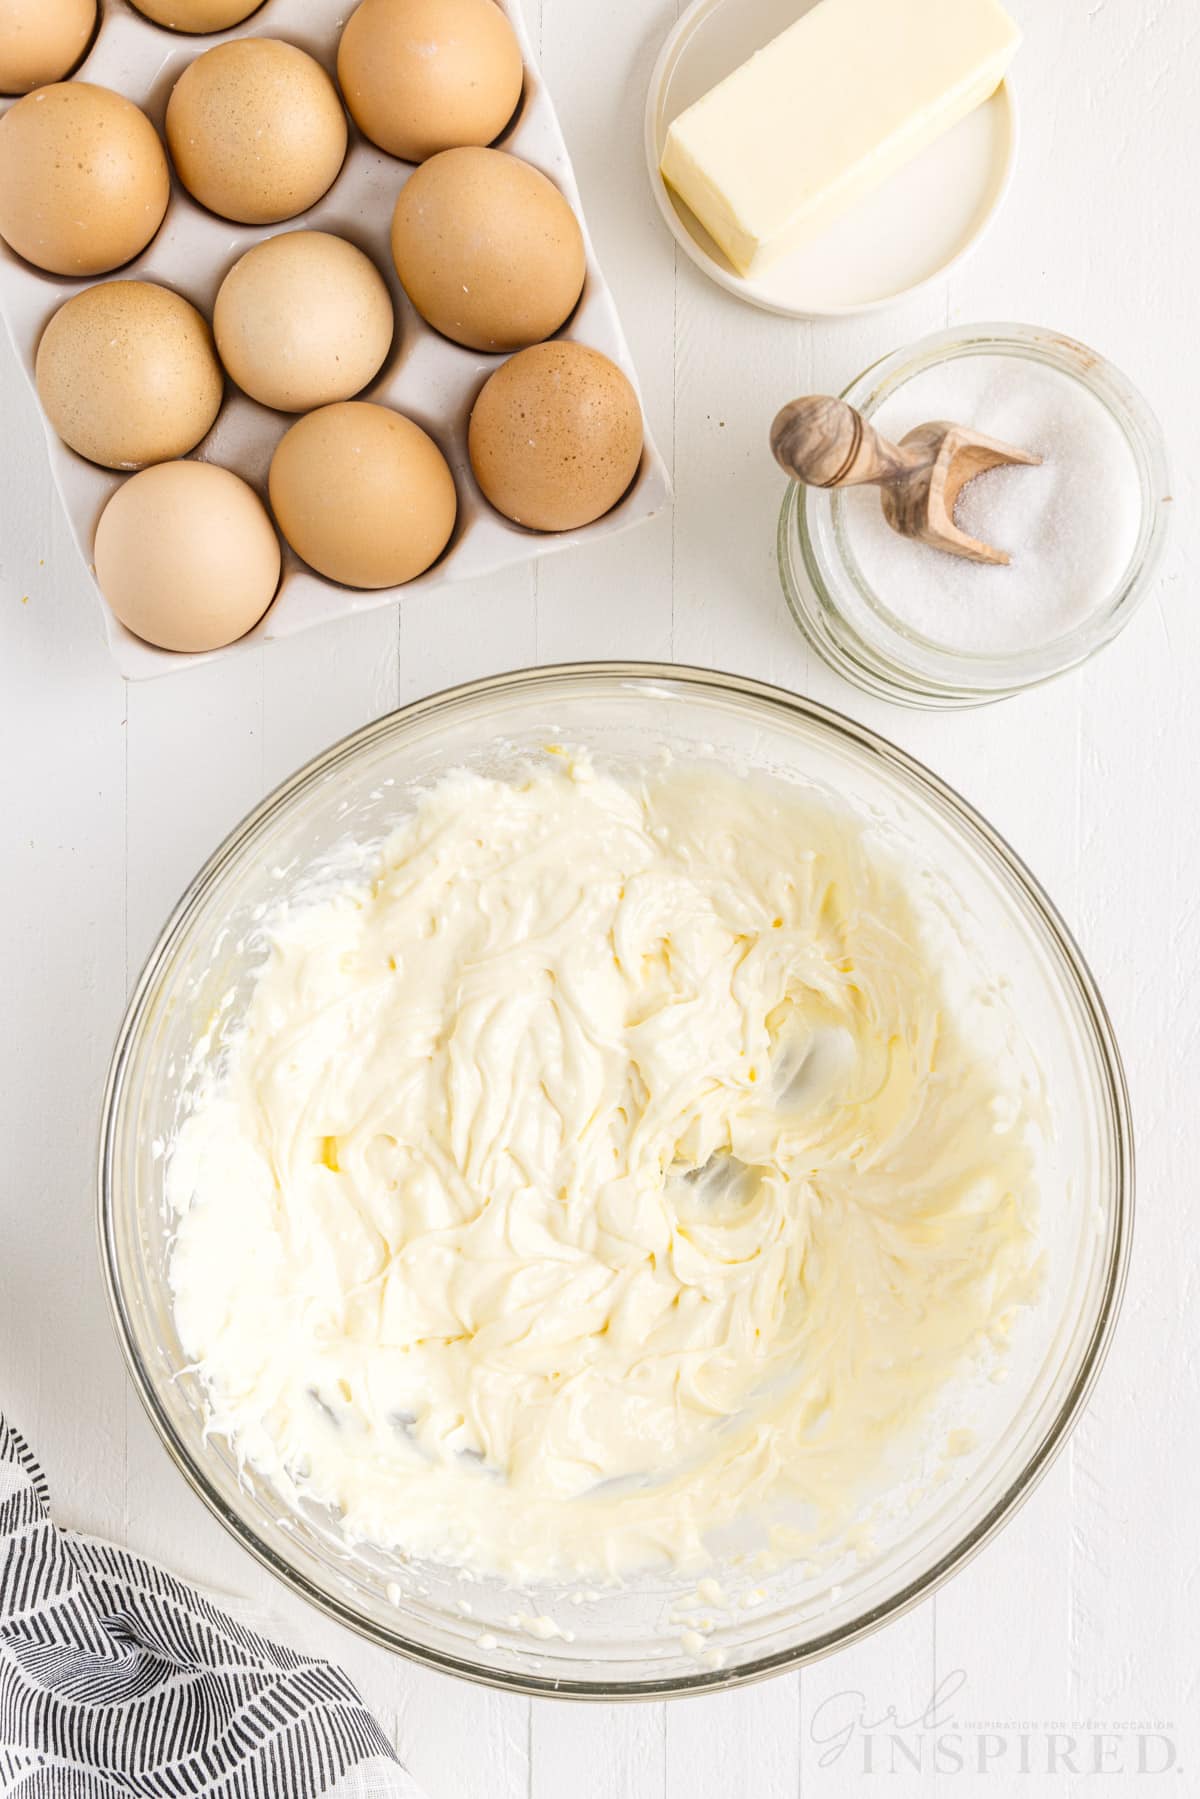 Cream cheese mixture in a glass bowl, tray of eggs, stick of butter, jar of sugar, textile linen, on a marble countertop.